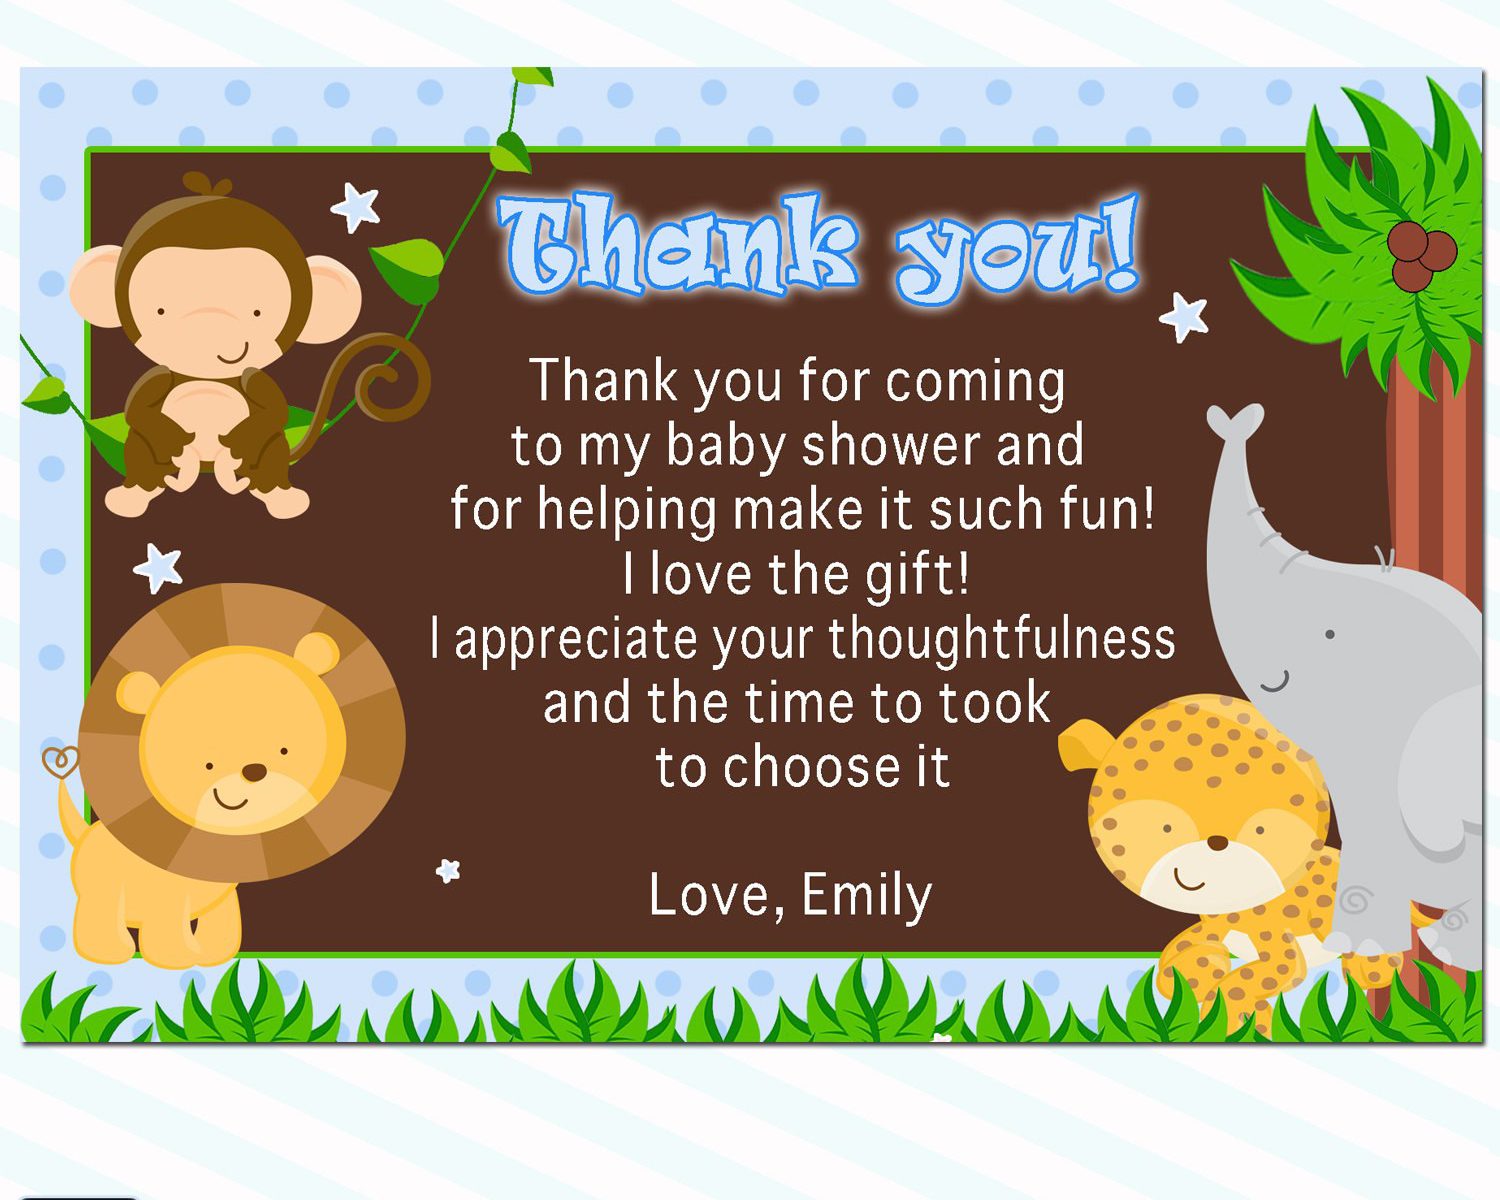 Full Size of Baby Shower:72+ Rousing Baby Shower Thank You Cards Picture Ideas Baby Shower Thank You Cards Etiquette New Notes Forifts Write Baby Shower Thank You Letter Choice Image Format Formal Sample Good Notes For Gifts Ideas 1600